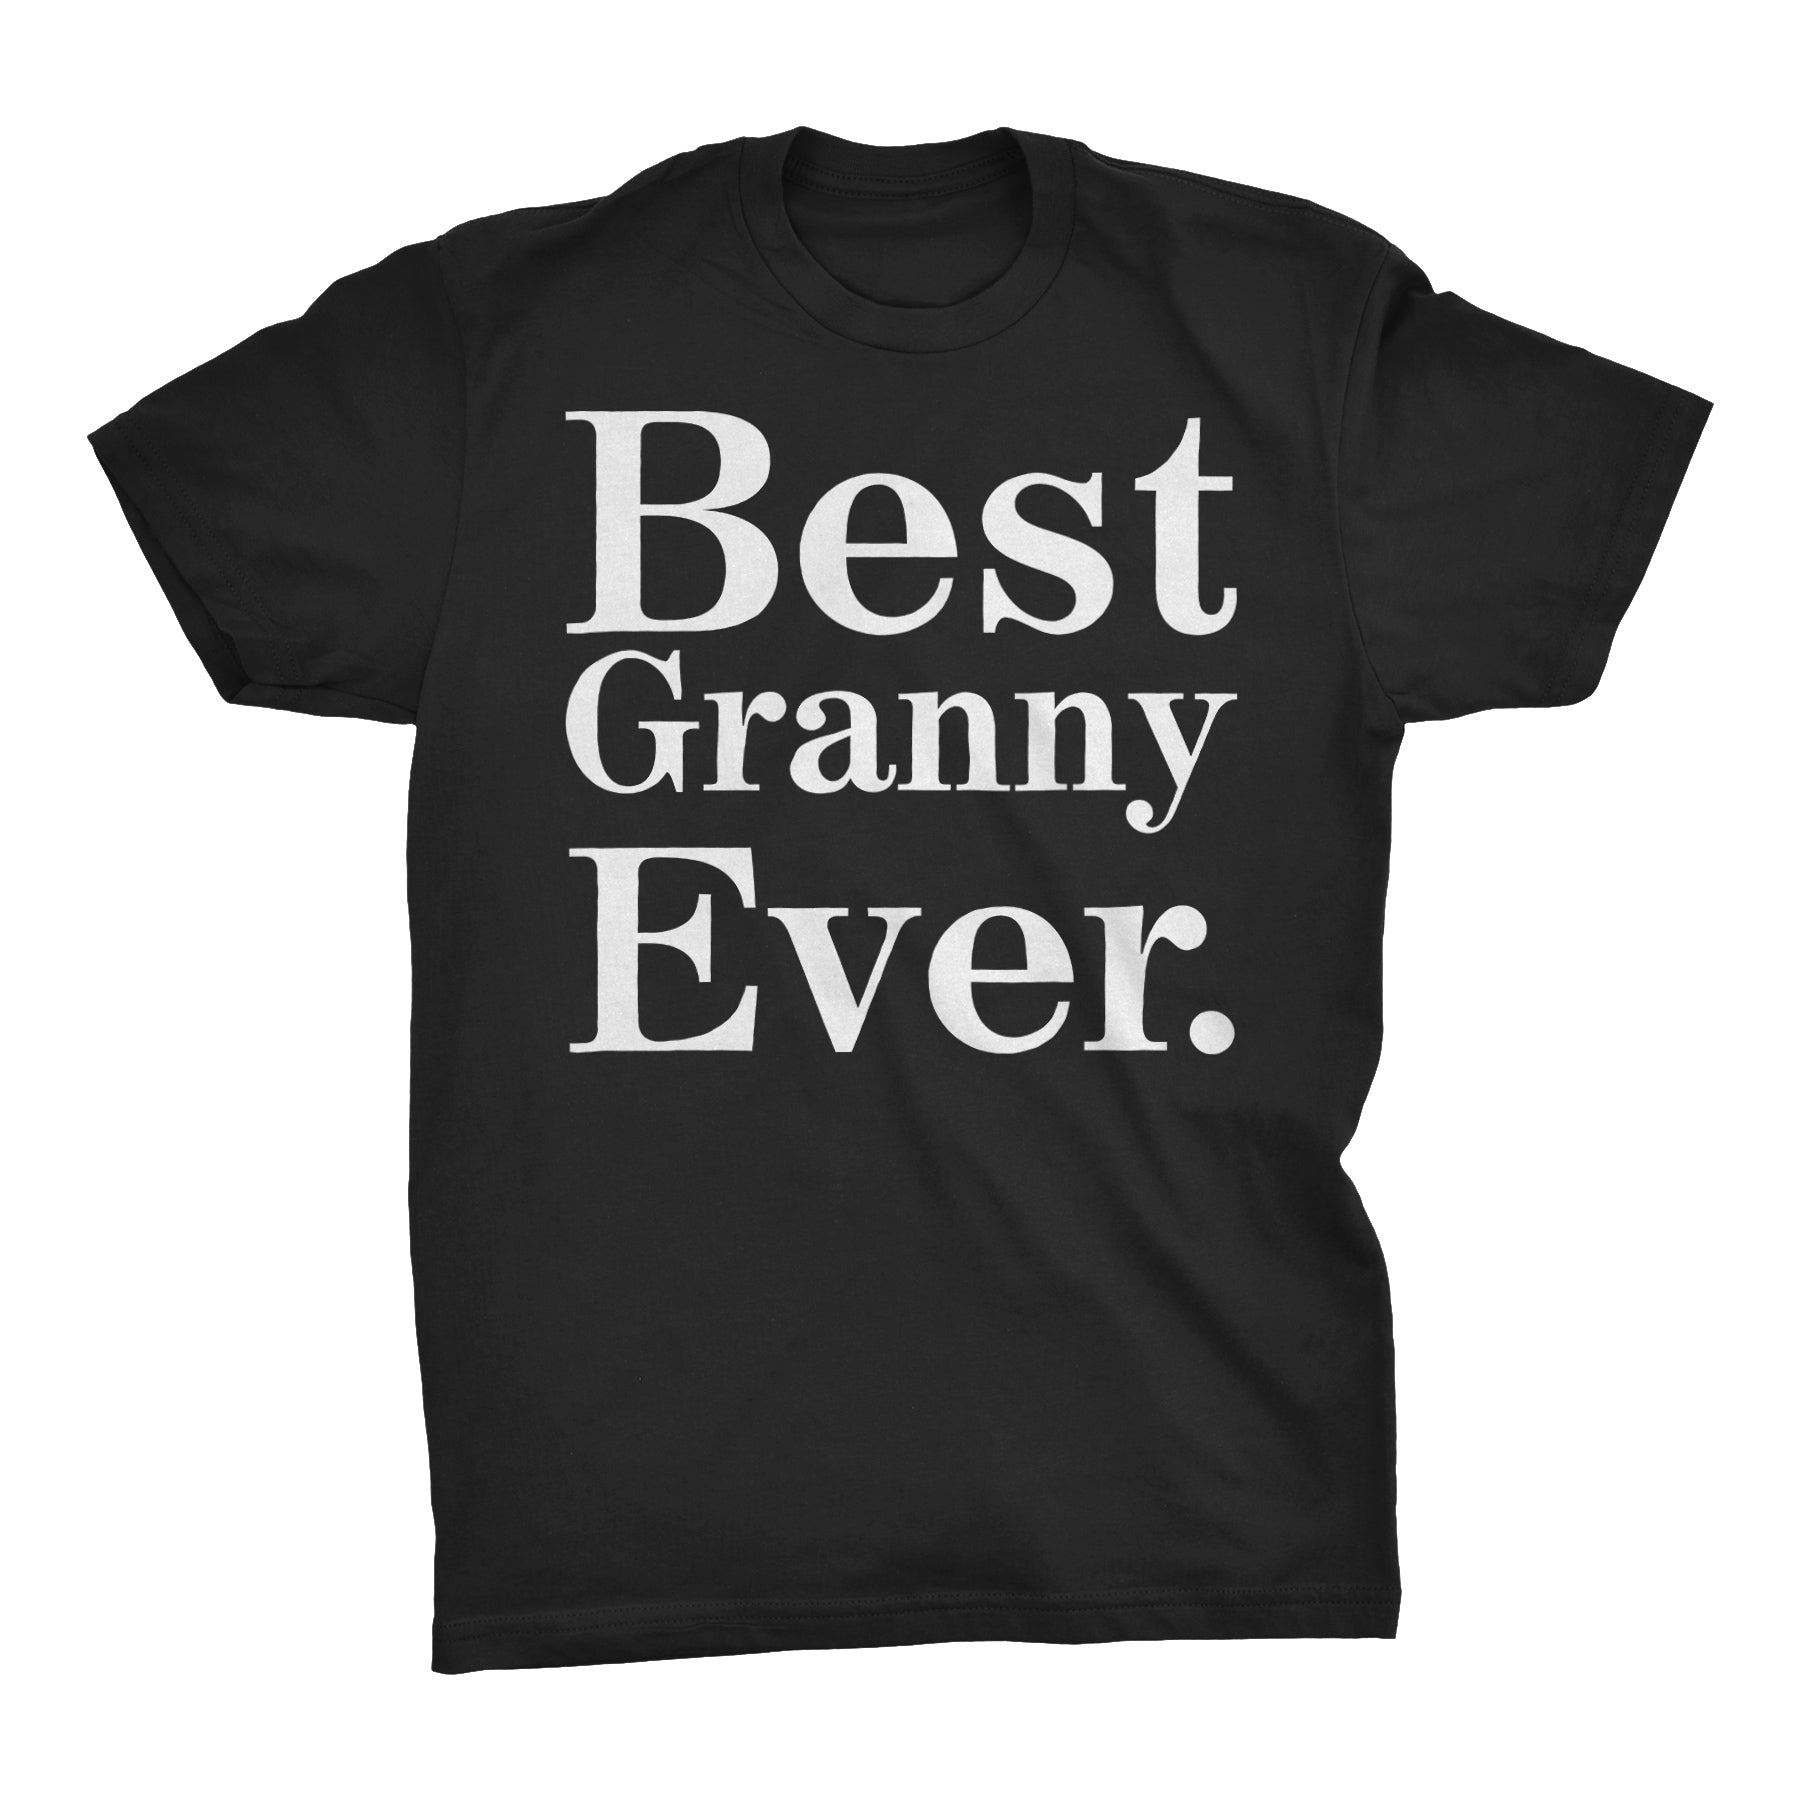 Best GRANNY Ever - 001 Mother's Day Grandmother T-shirt